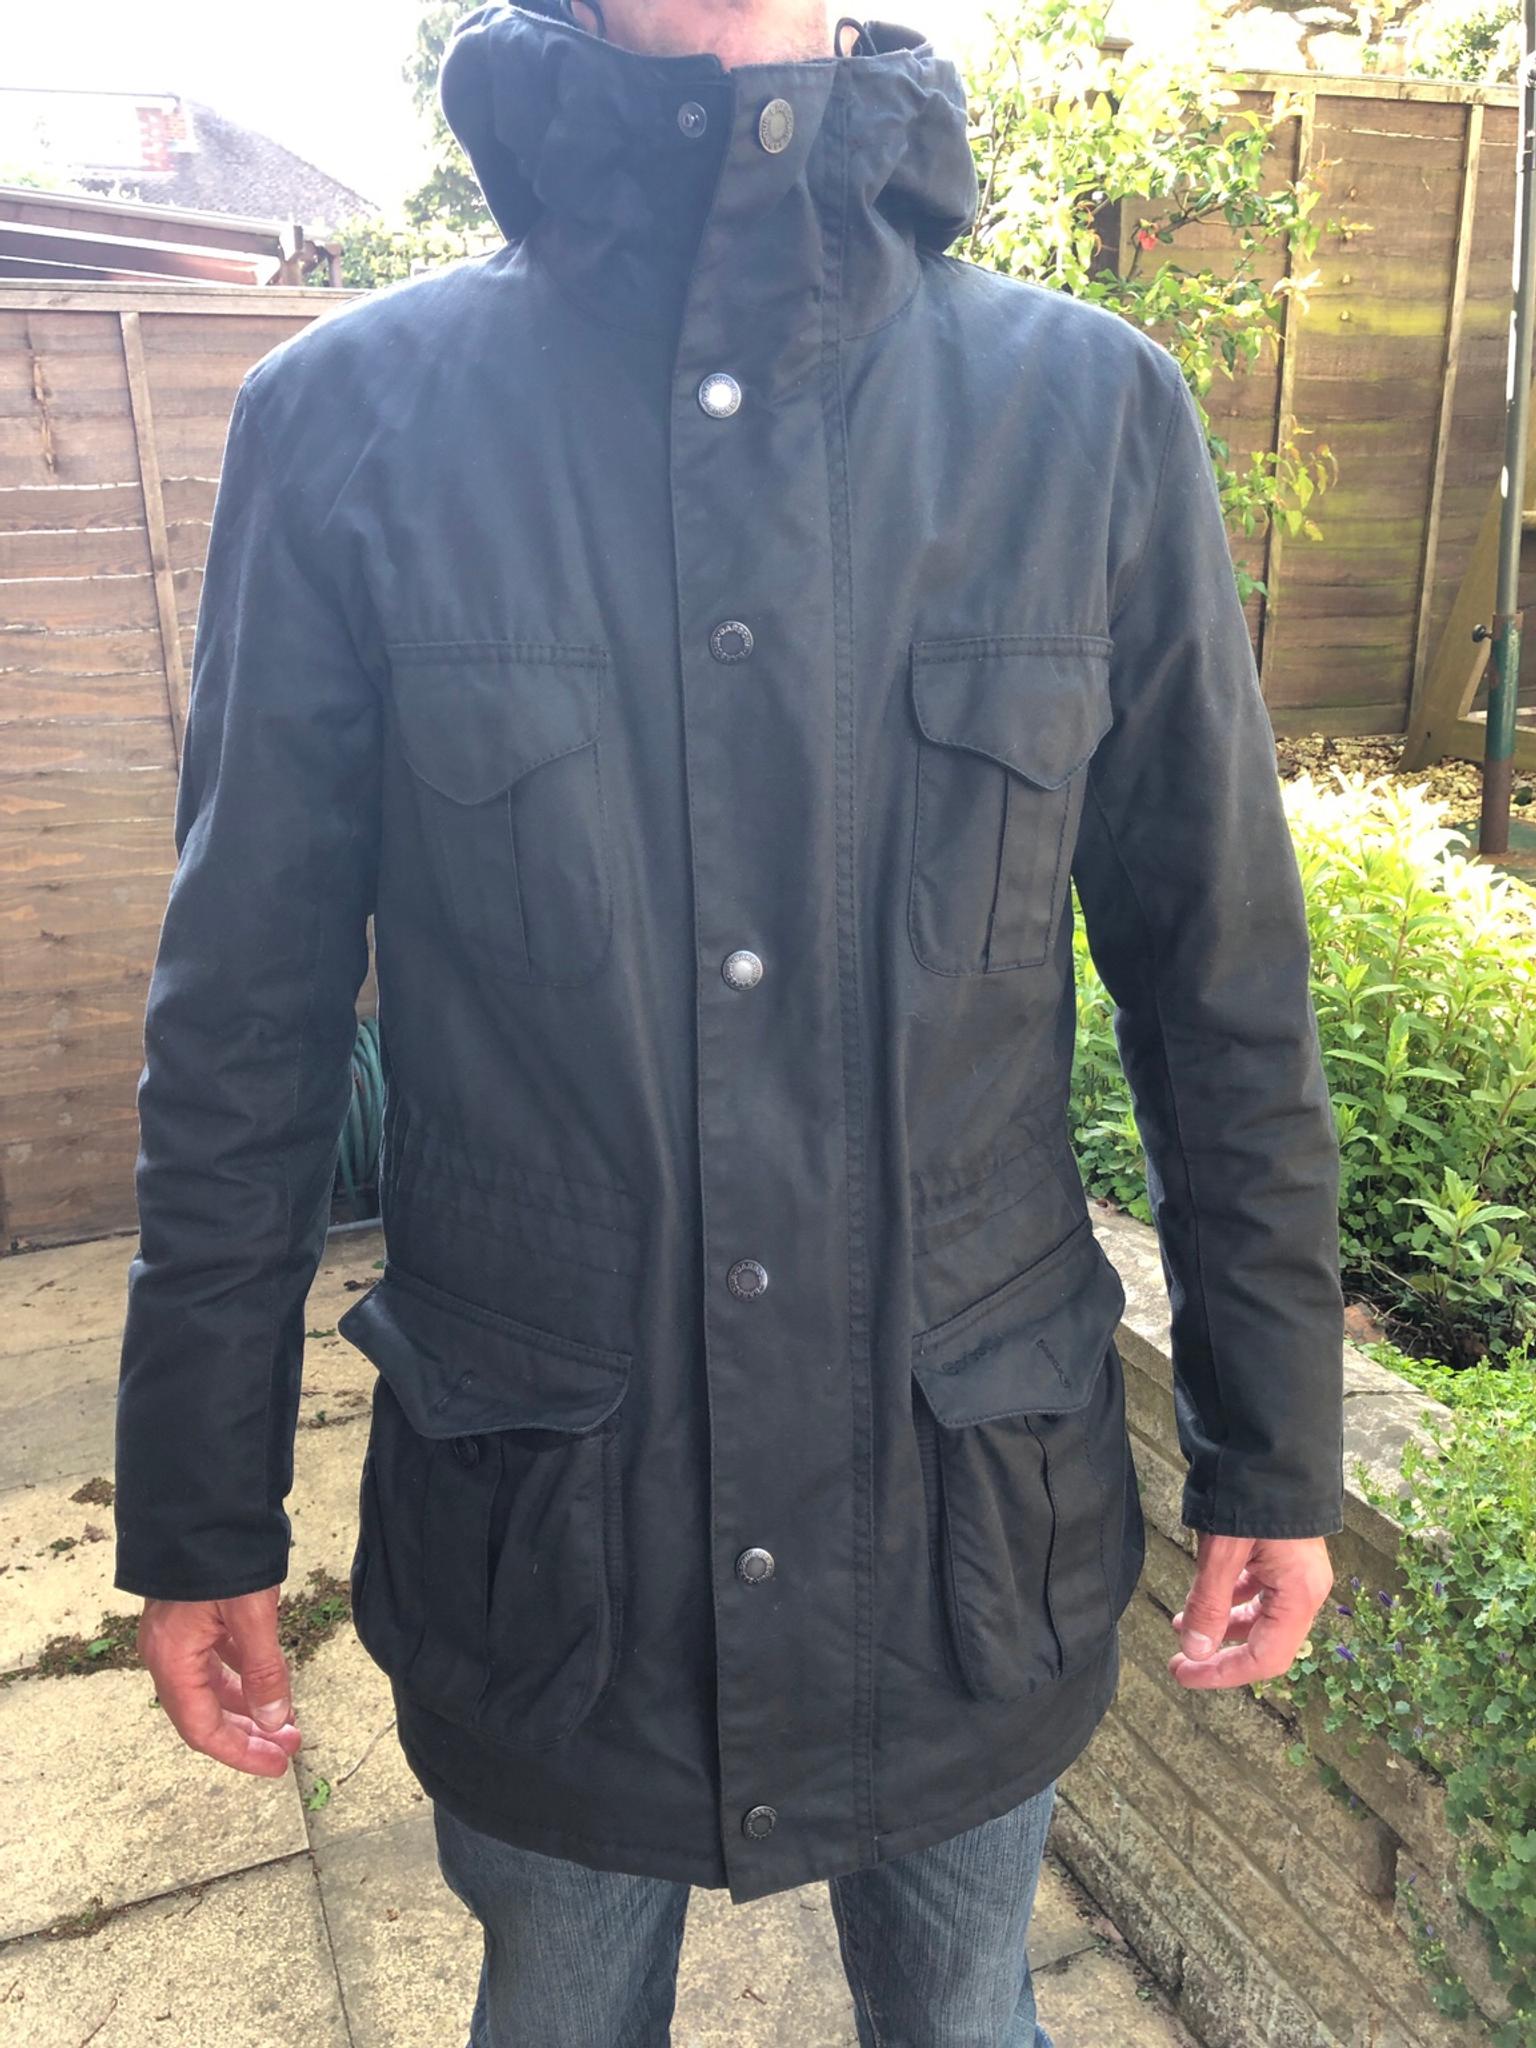 barbour mens jacket with hood